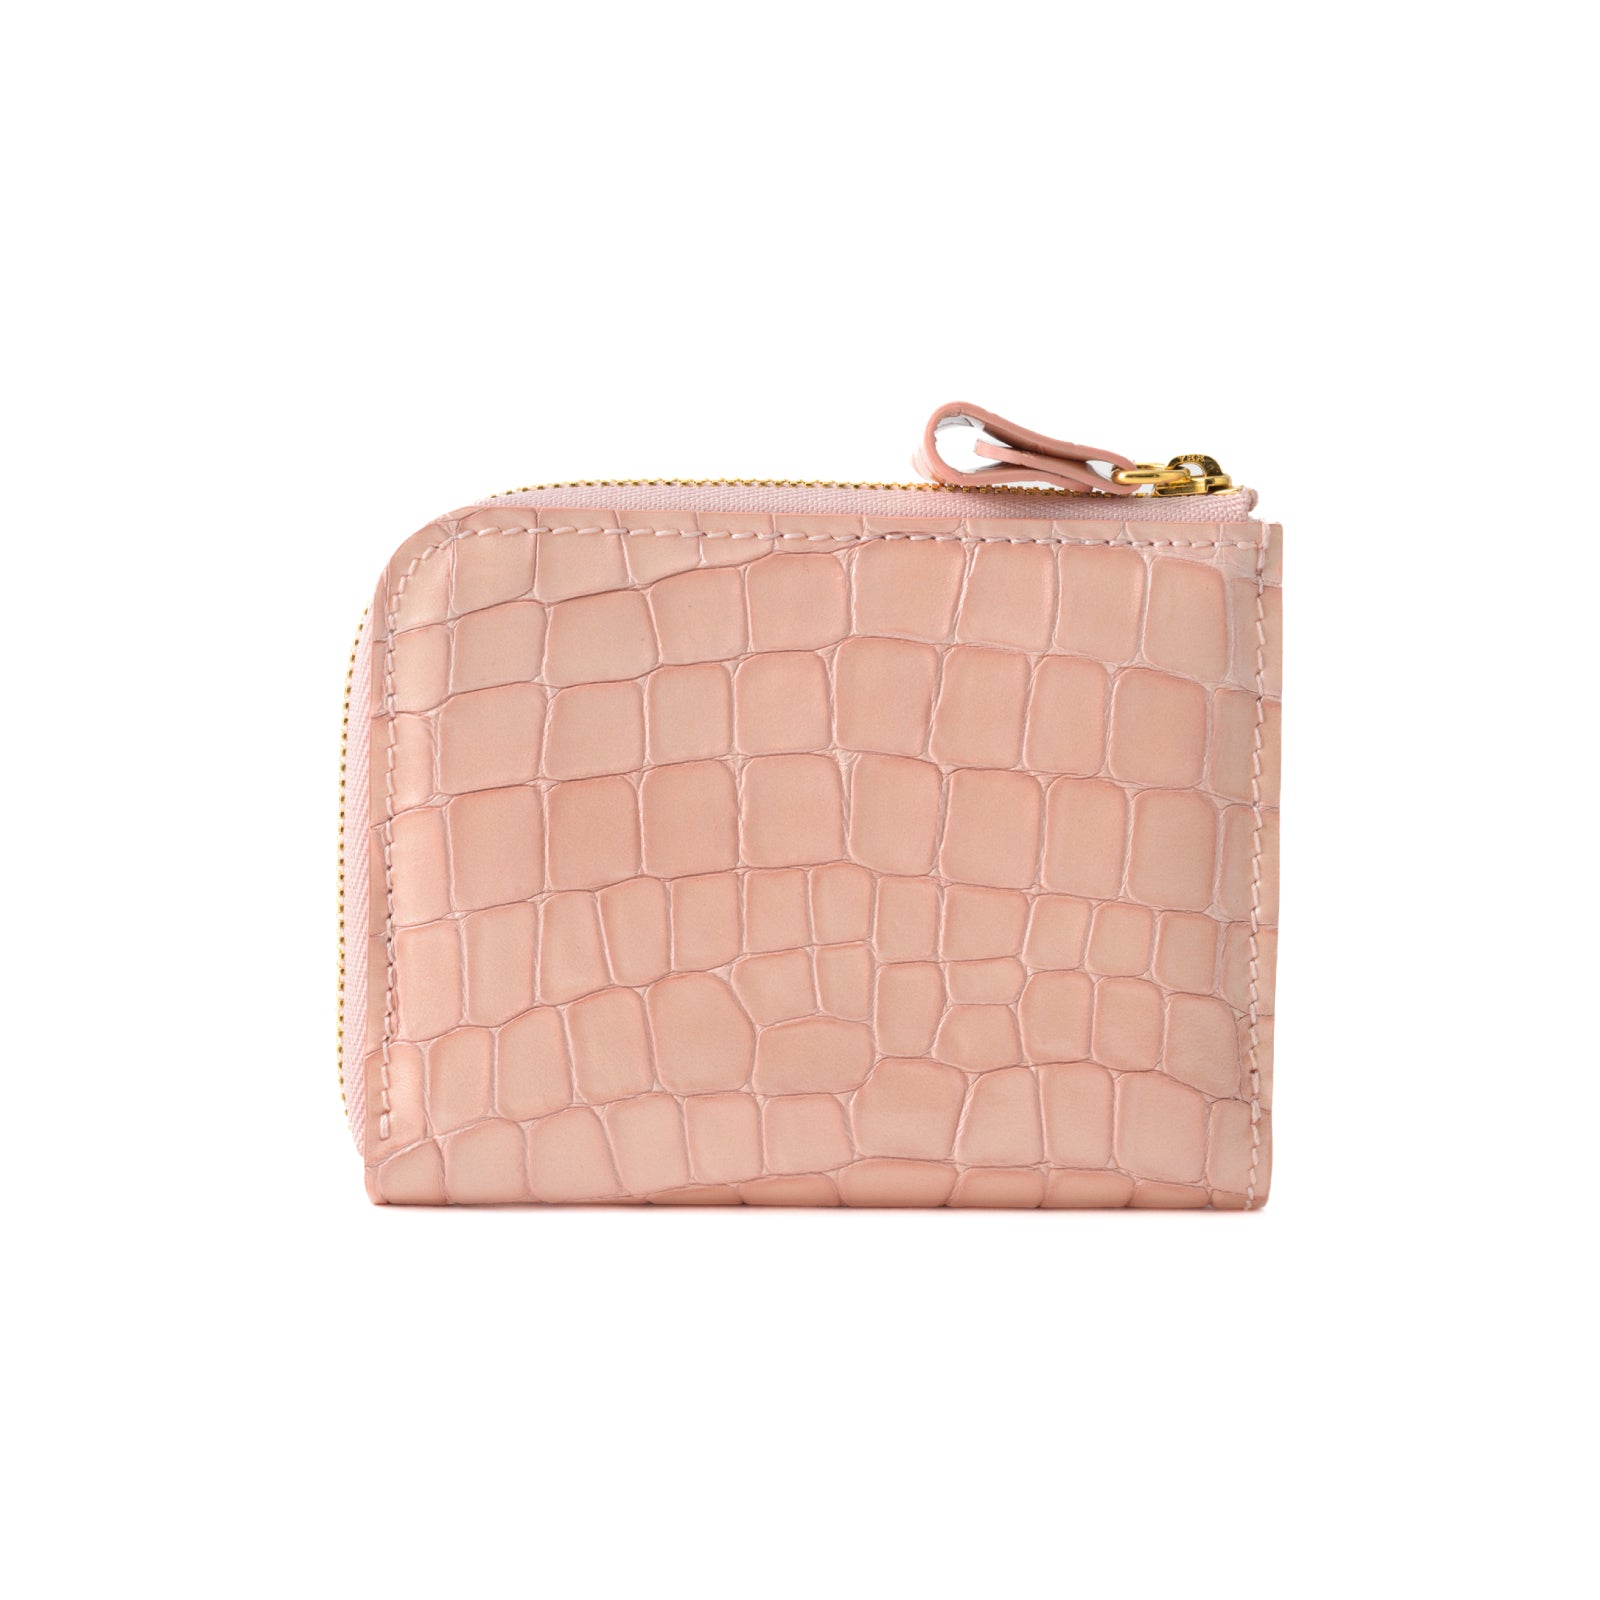 L-shaped zipper minimal wallet in Chromer leather / Peach jelly